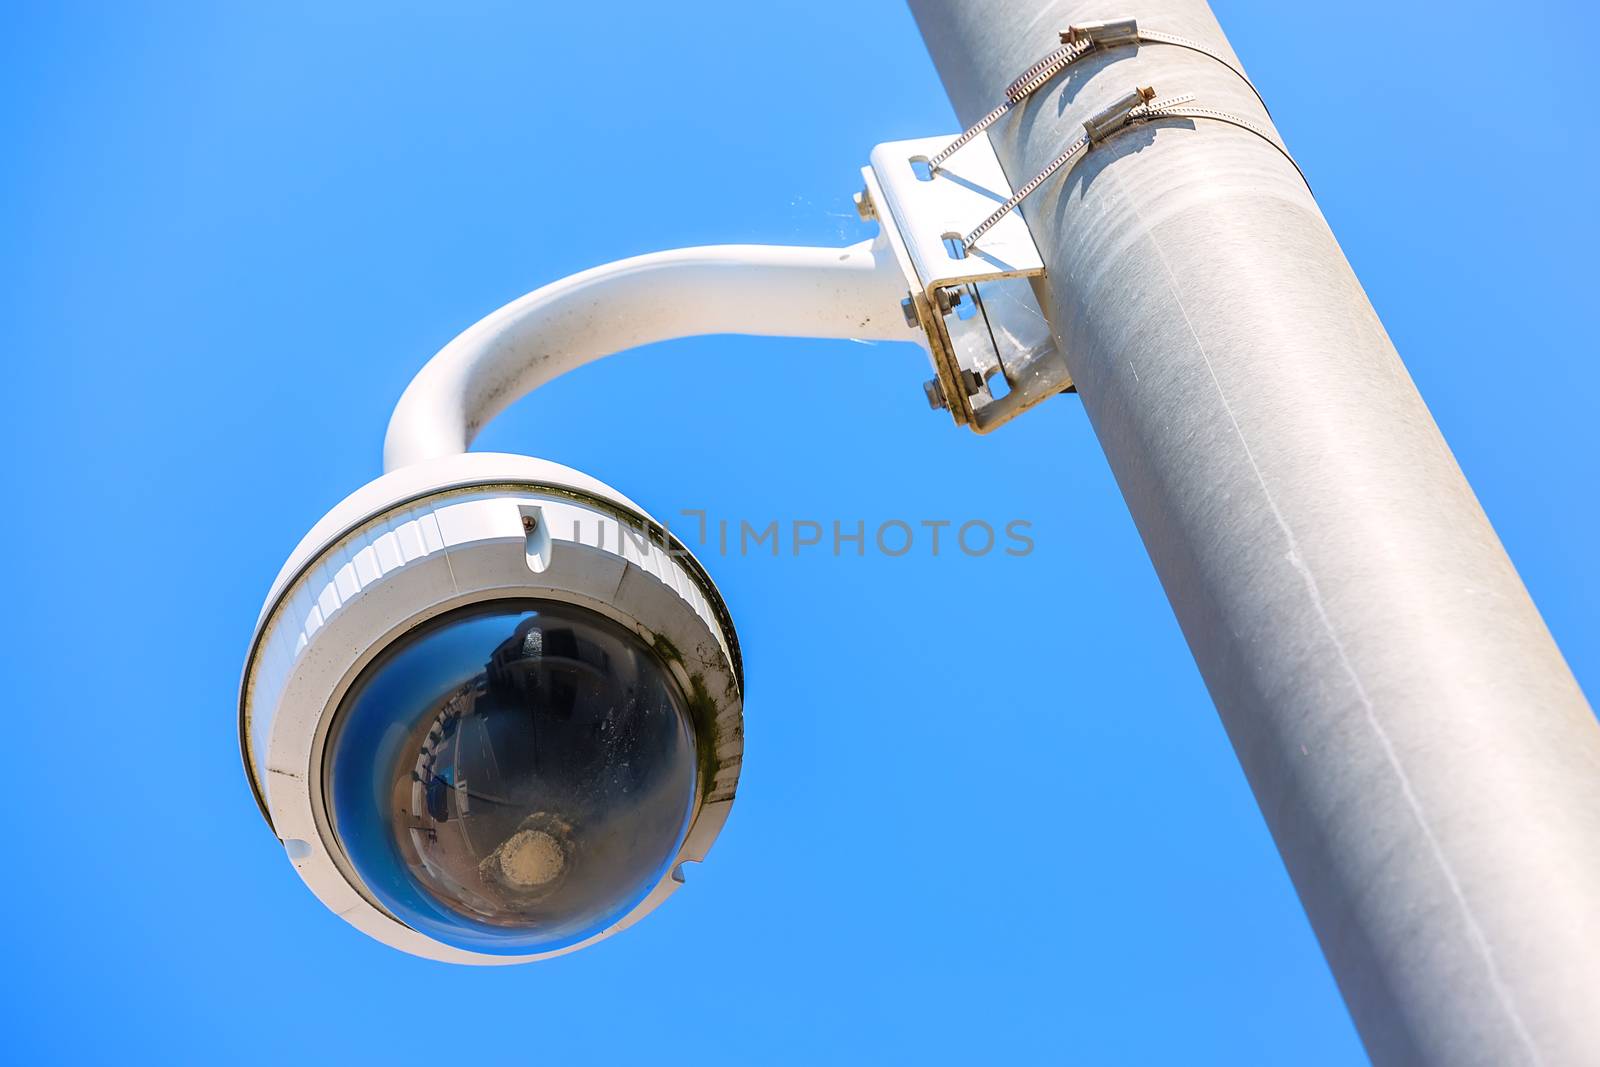 CCTV camera under blue sky seaside for the safety of tourists